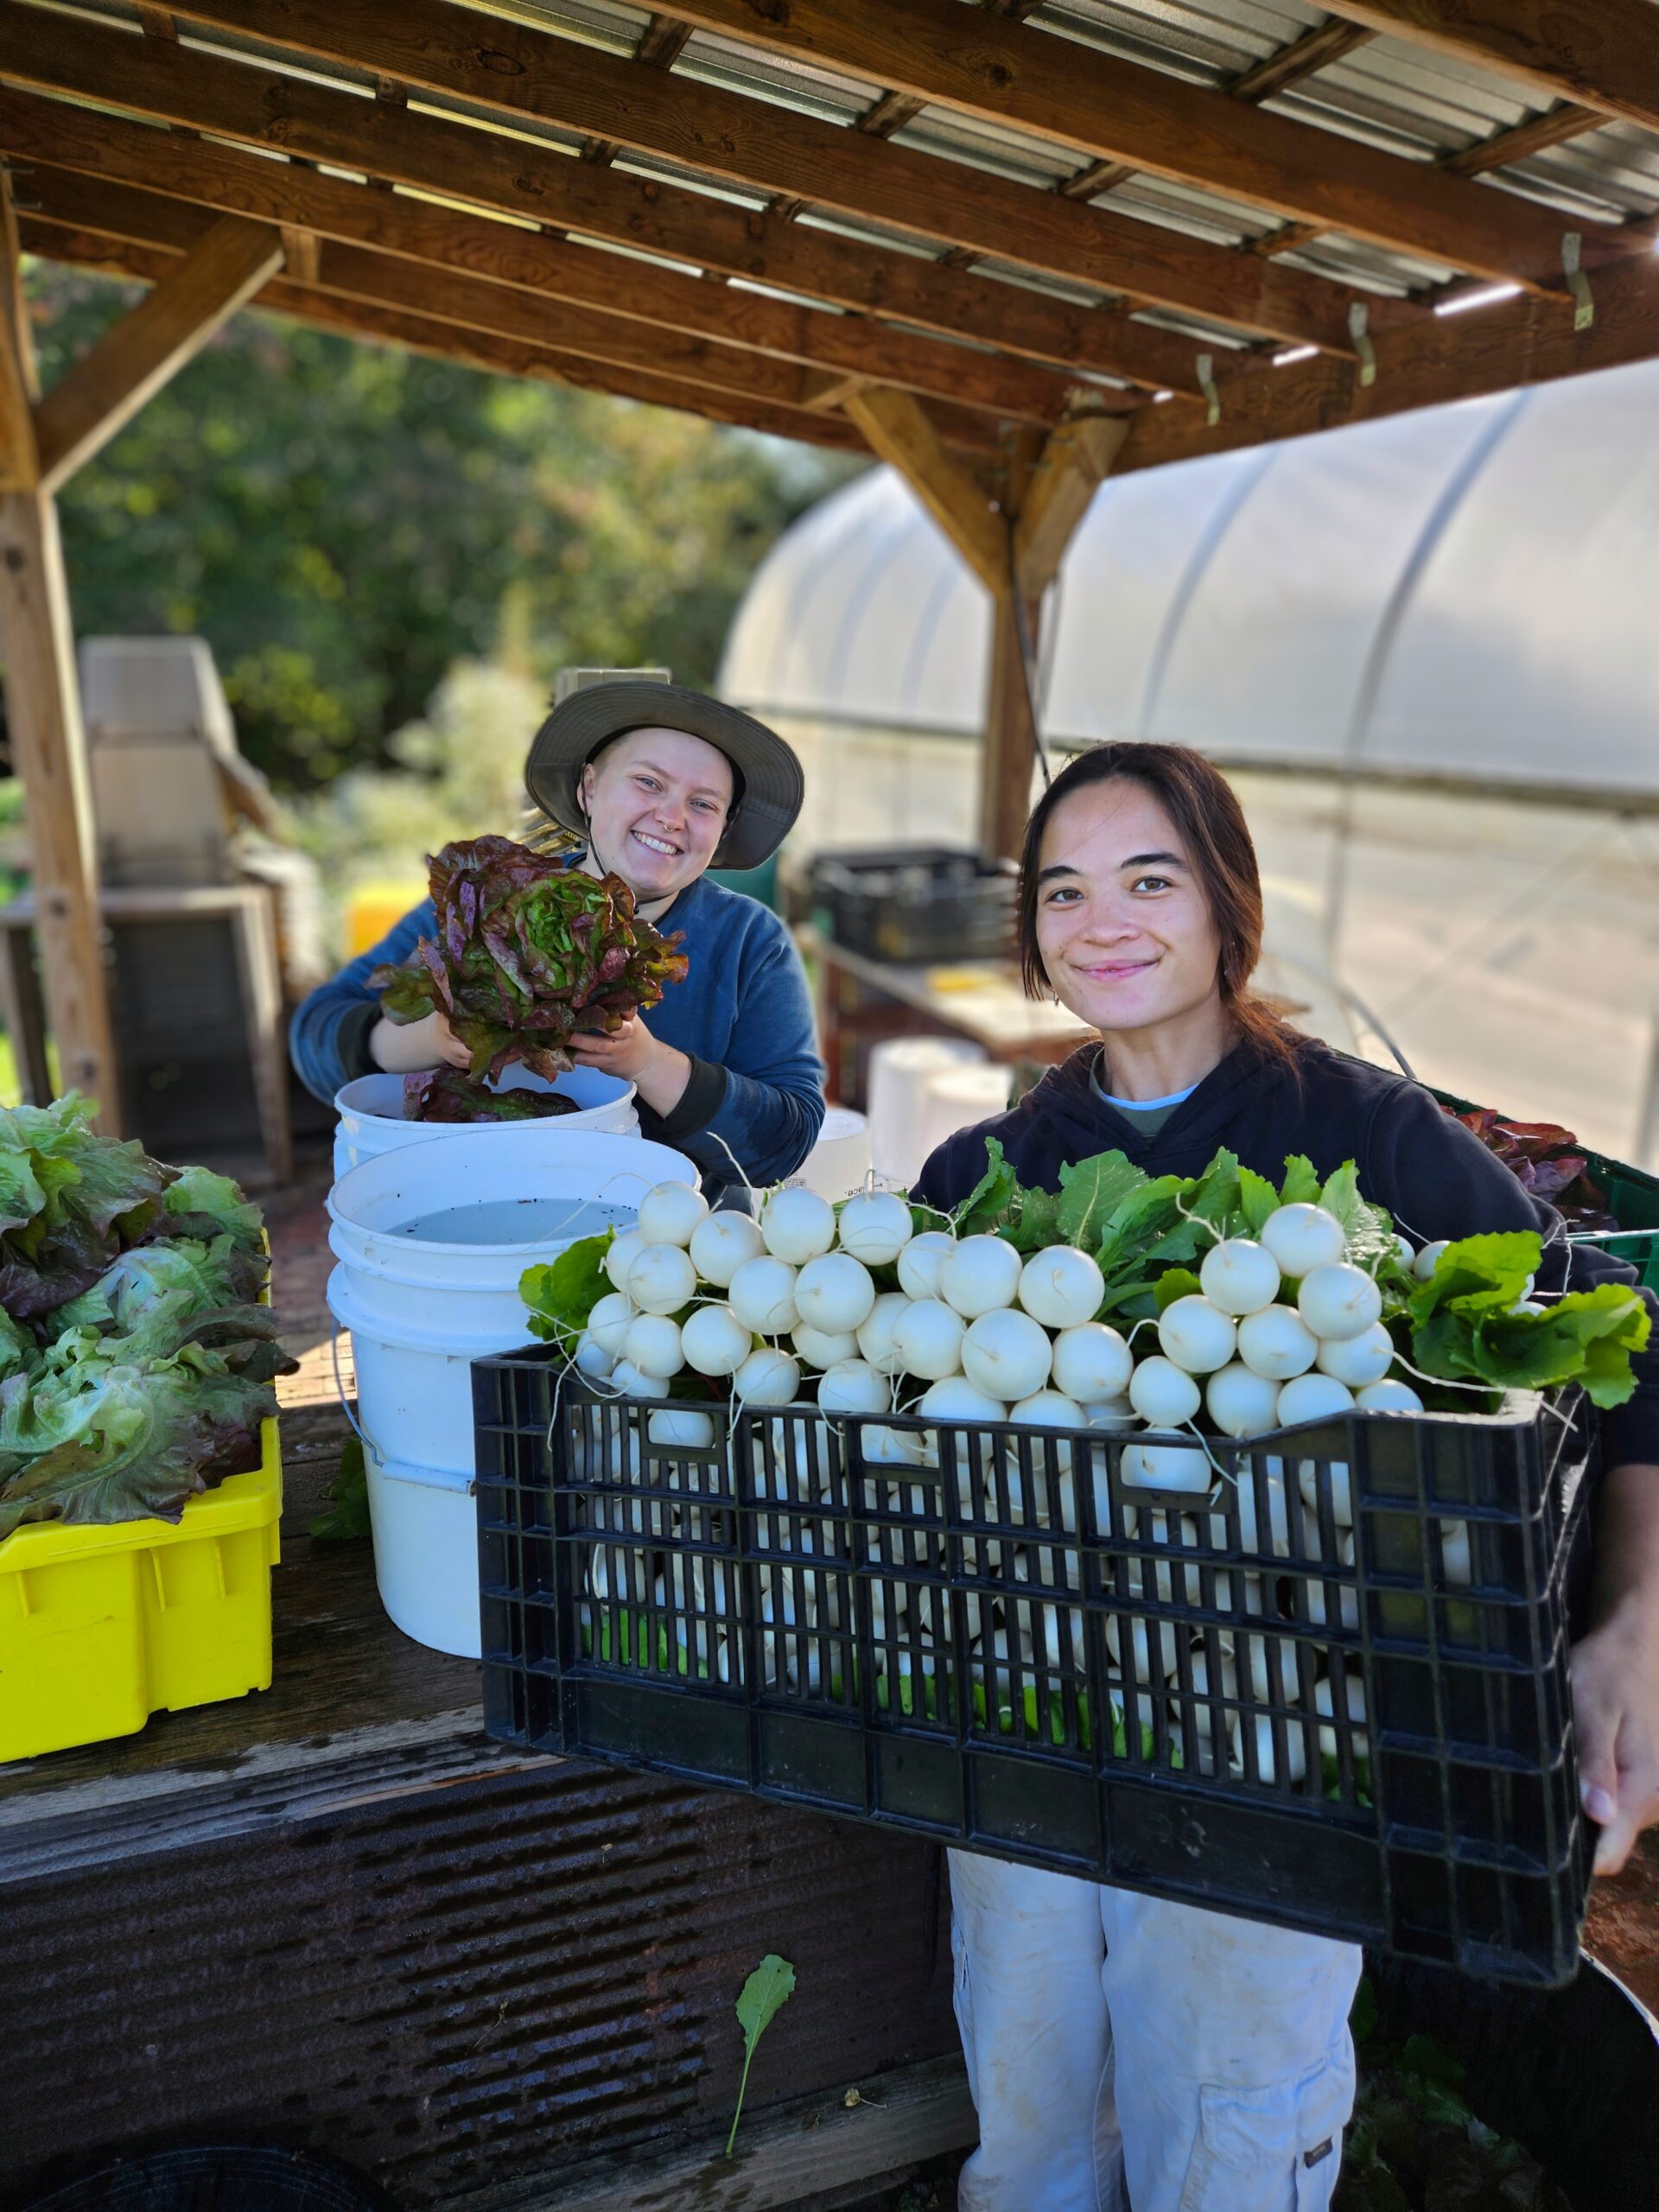 Rutgers Gardens Student Farm staff prepares fresh produce to sell at Cook's Market.